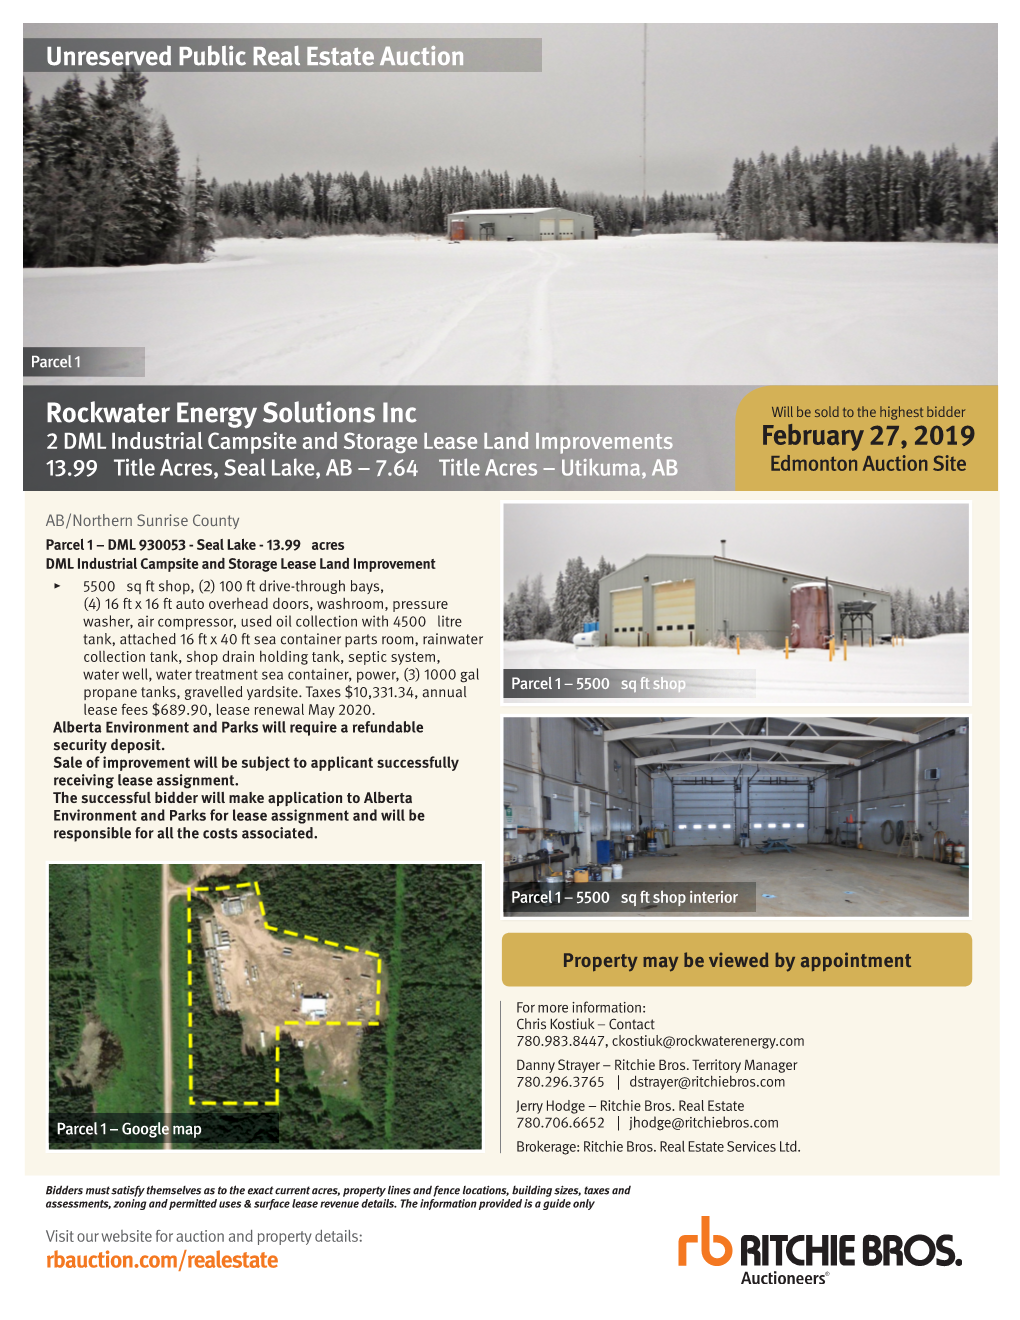 Rockwater Energy Solutions Inc February 27, 2019